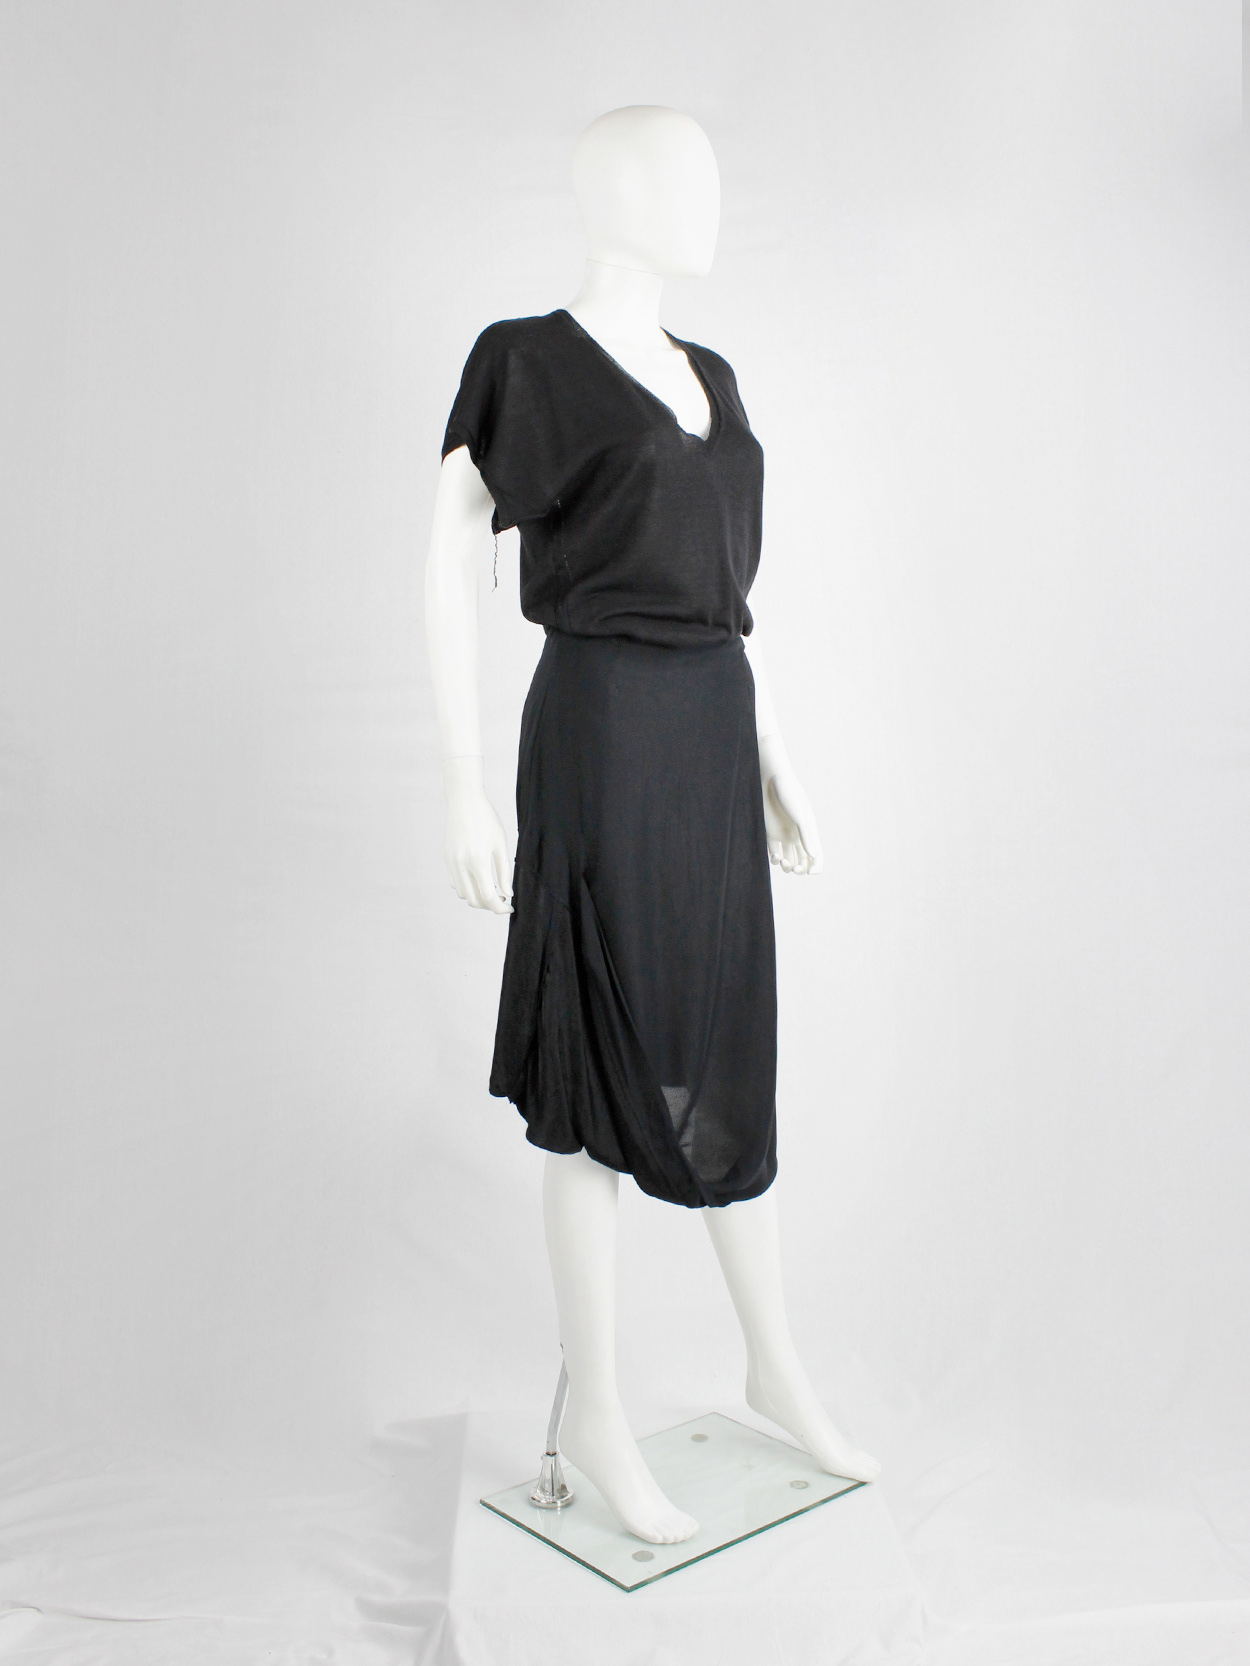 Maison Martin Margiela black partly lifted skirt with exposed lining ...